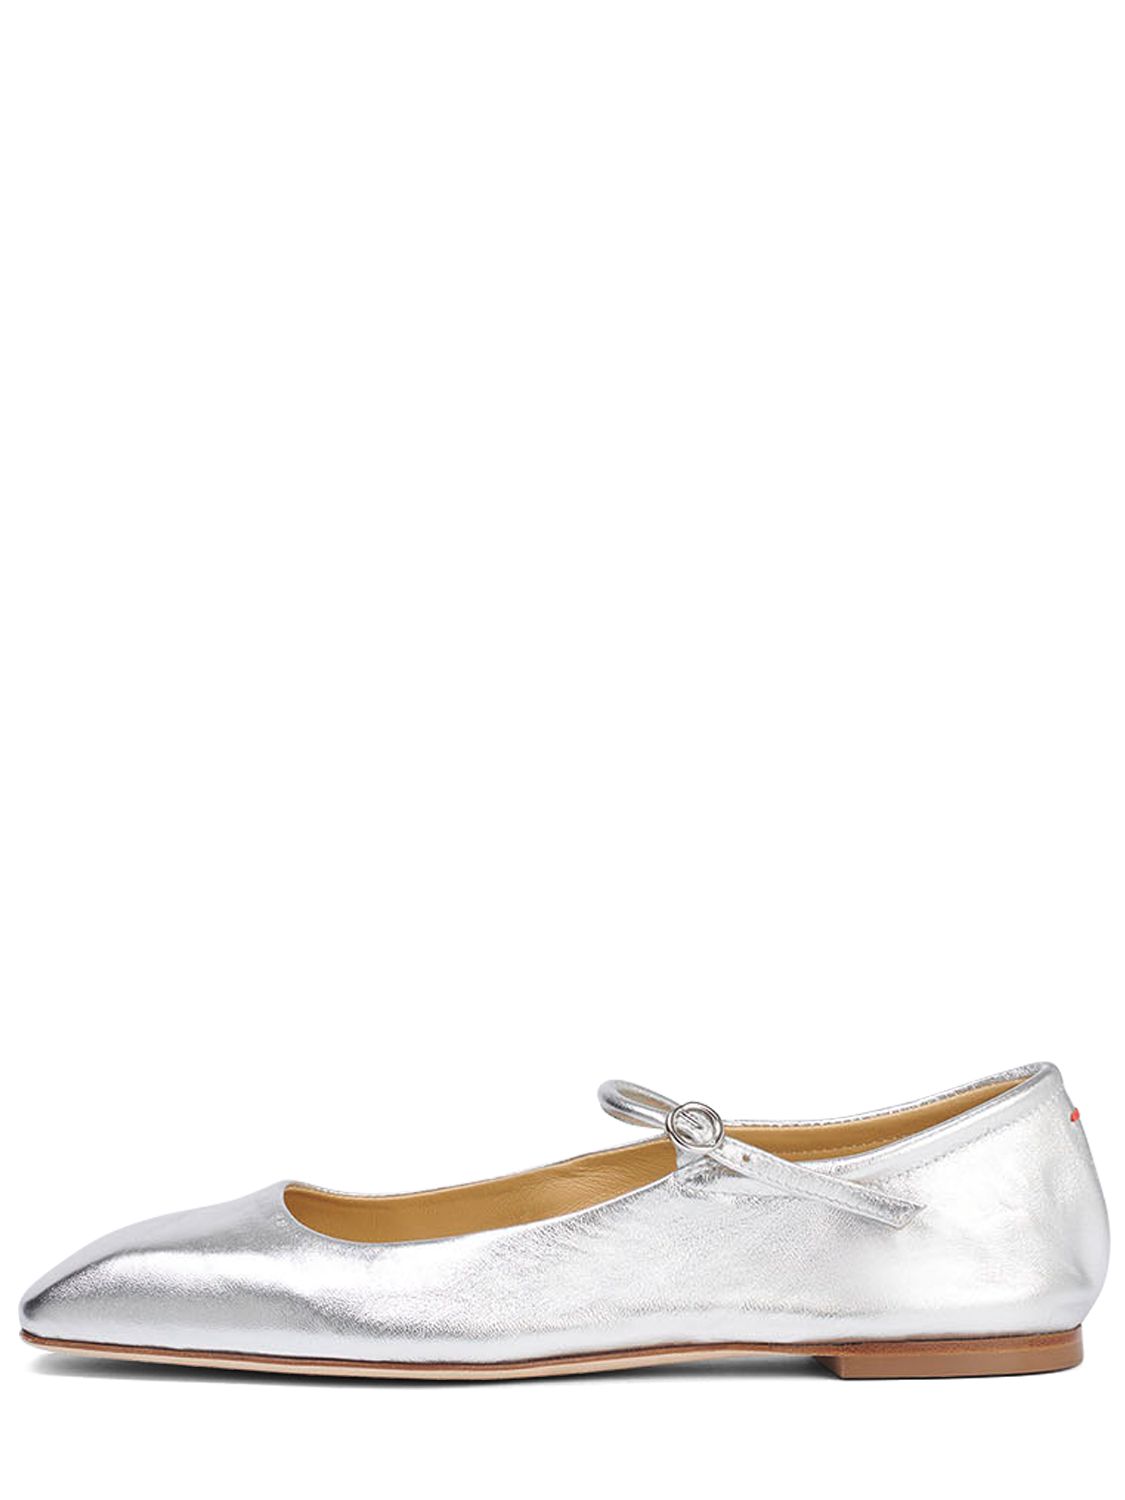 Shop Aeyde 10mm Uma Laminated Leather Ballerina In Silver